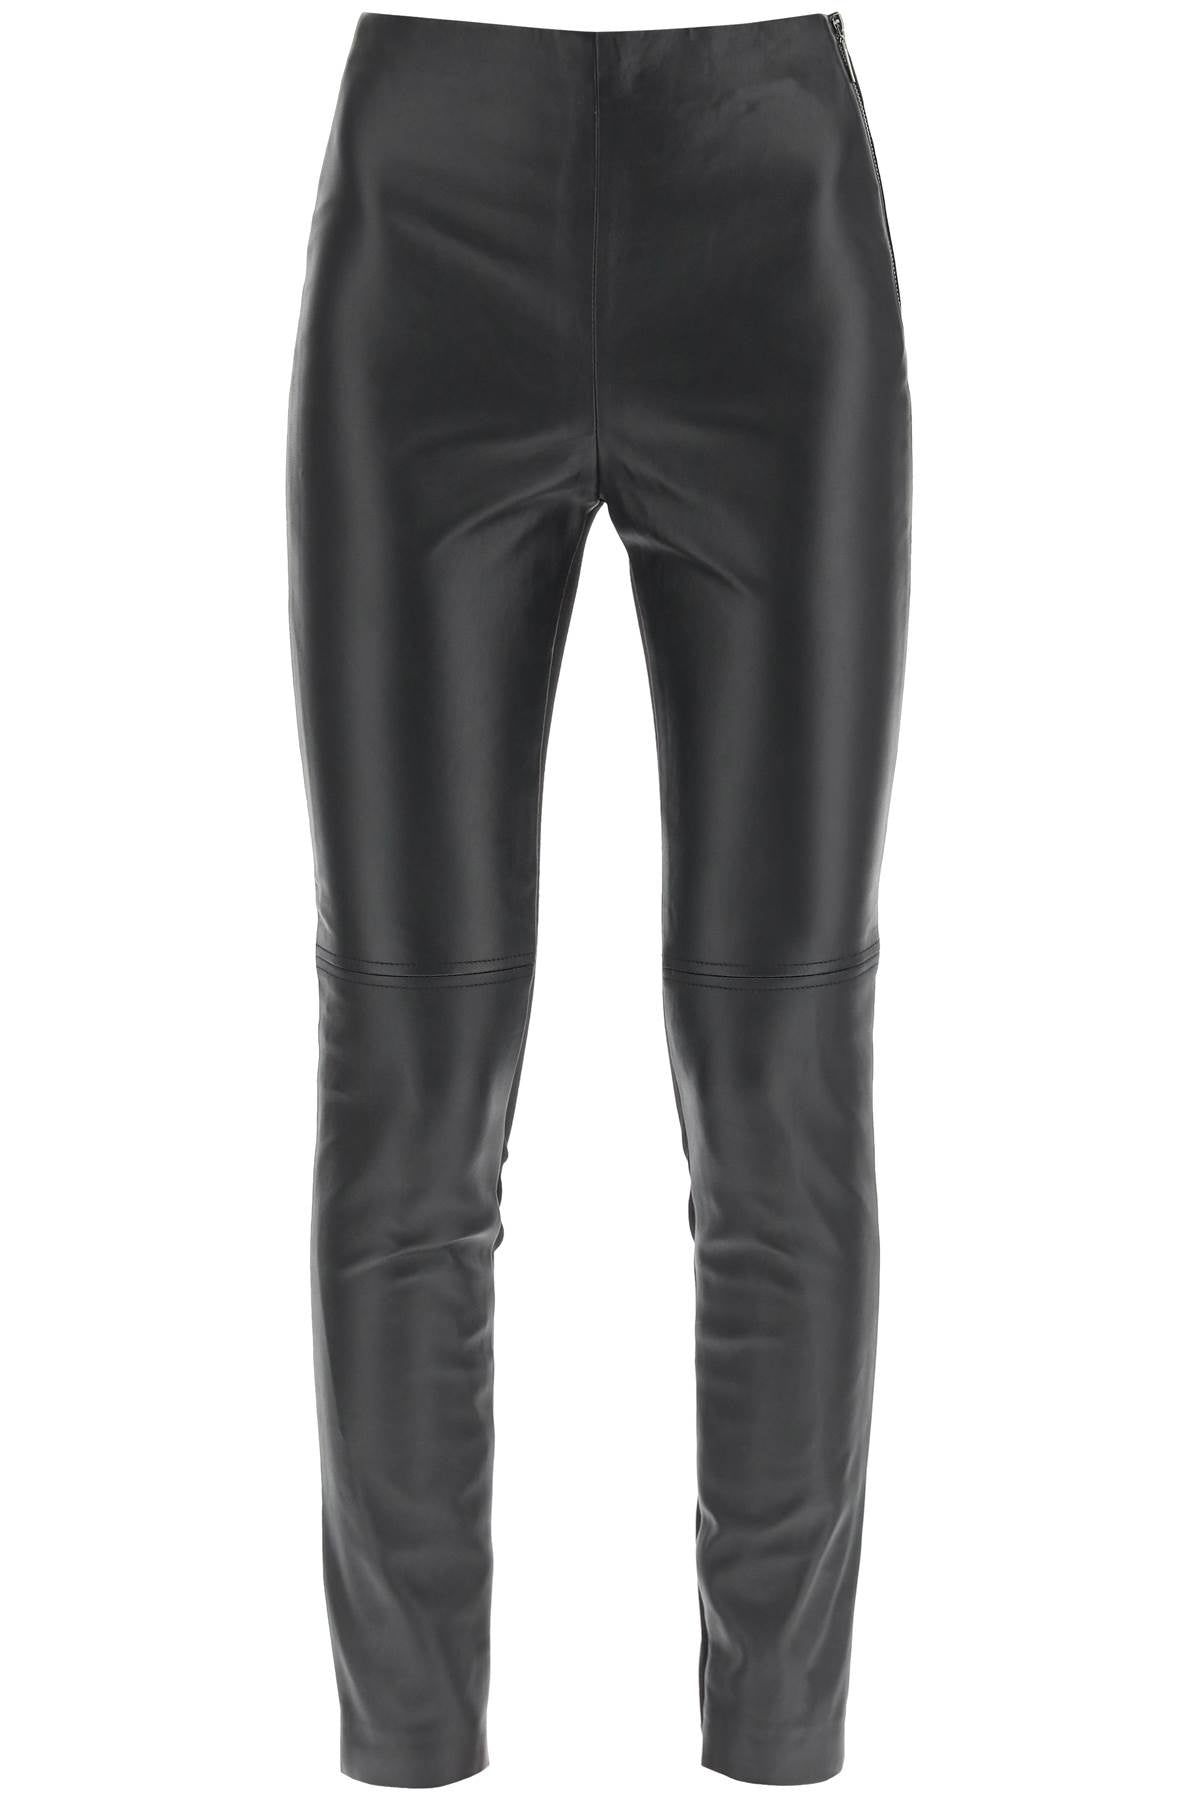 Marciano by guess leather and jersey leggings-0